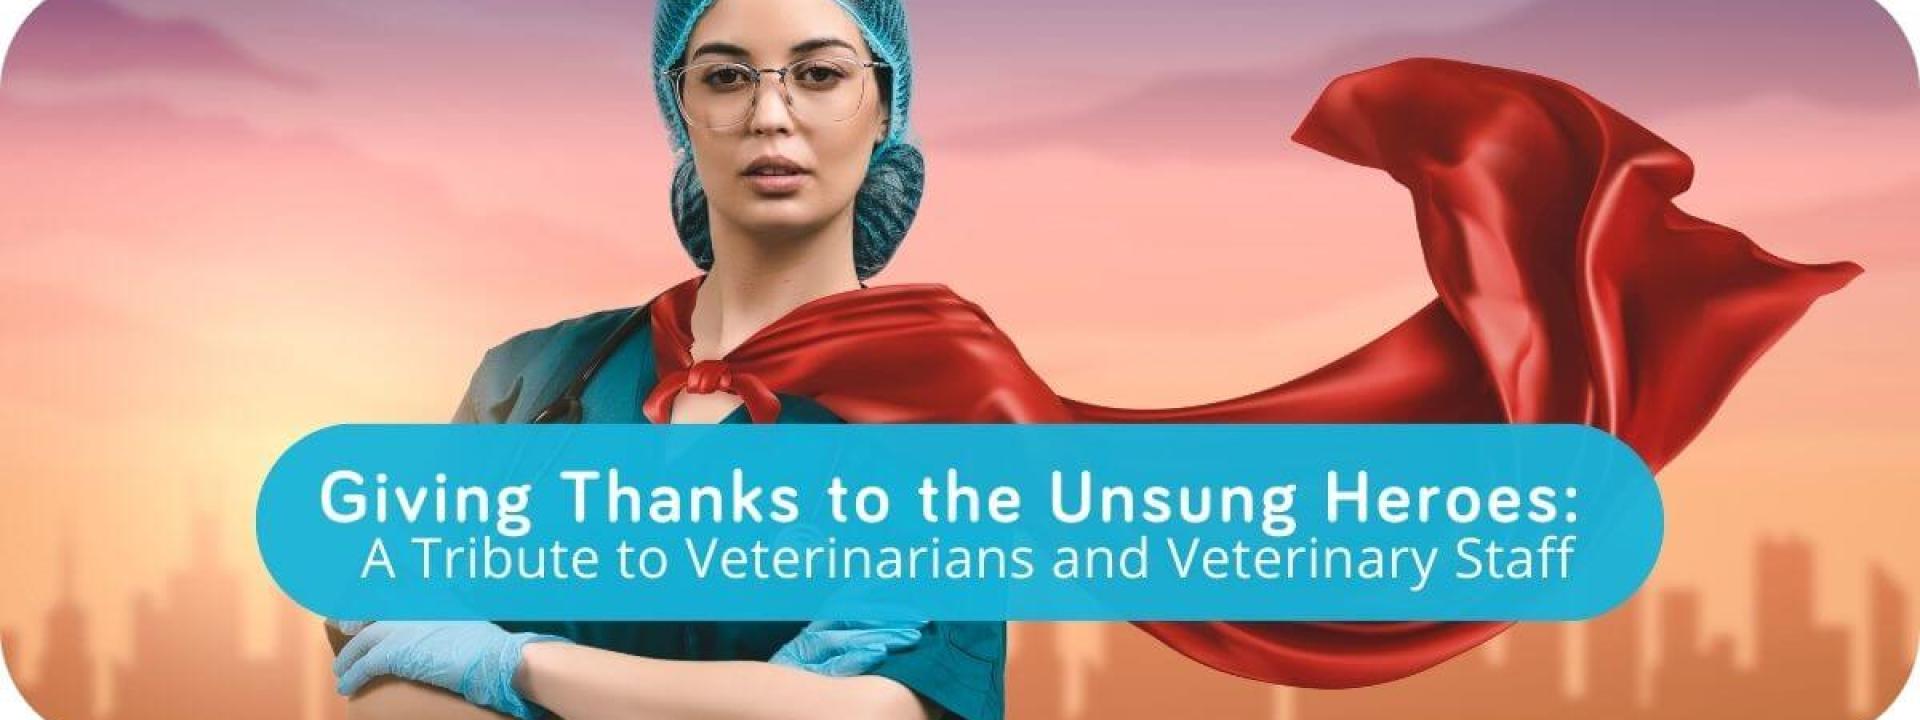 Giving Thanks to the Unsung Heroes: A Tribute to Veterinarians and Veterinary Staff